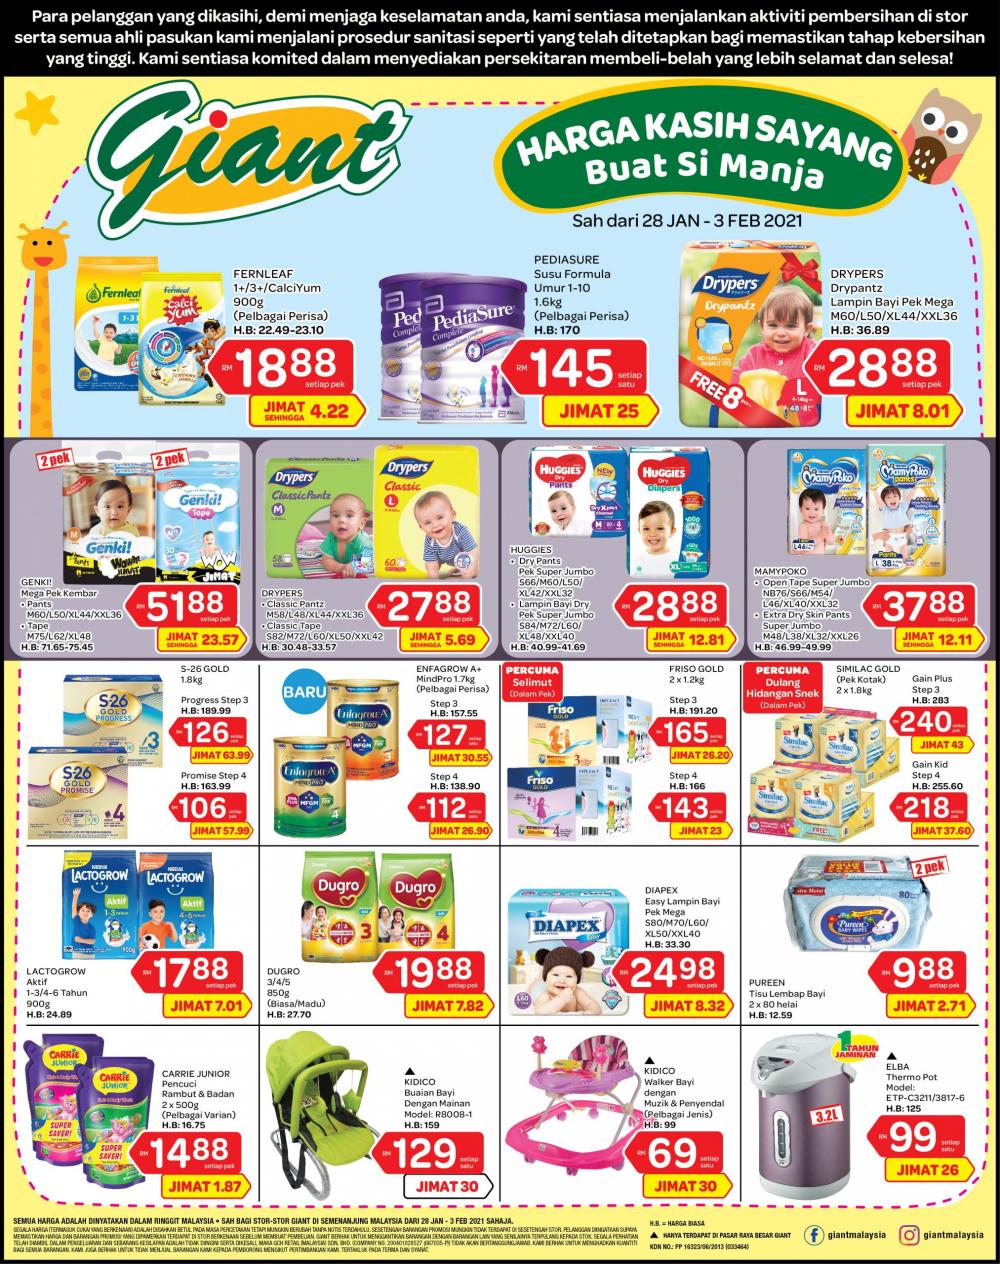 Giant Baby Products Promotion (28 January 2021 - 3 February 2021)